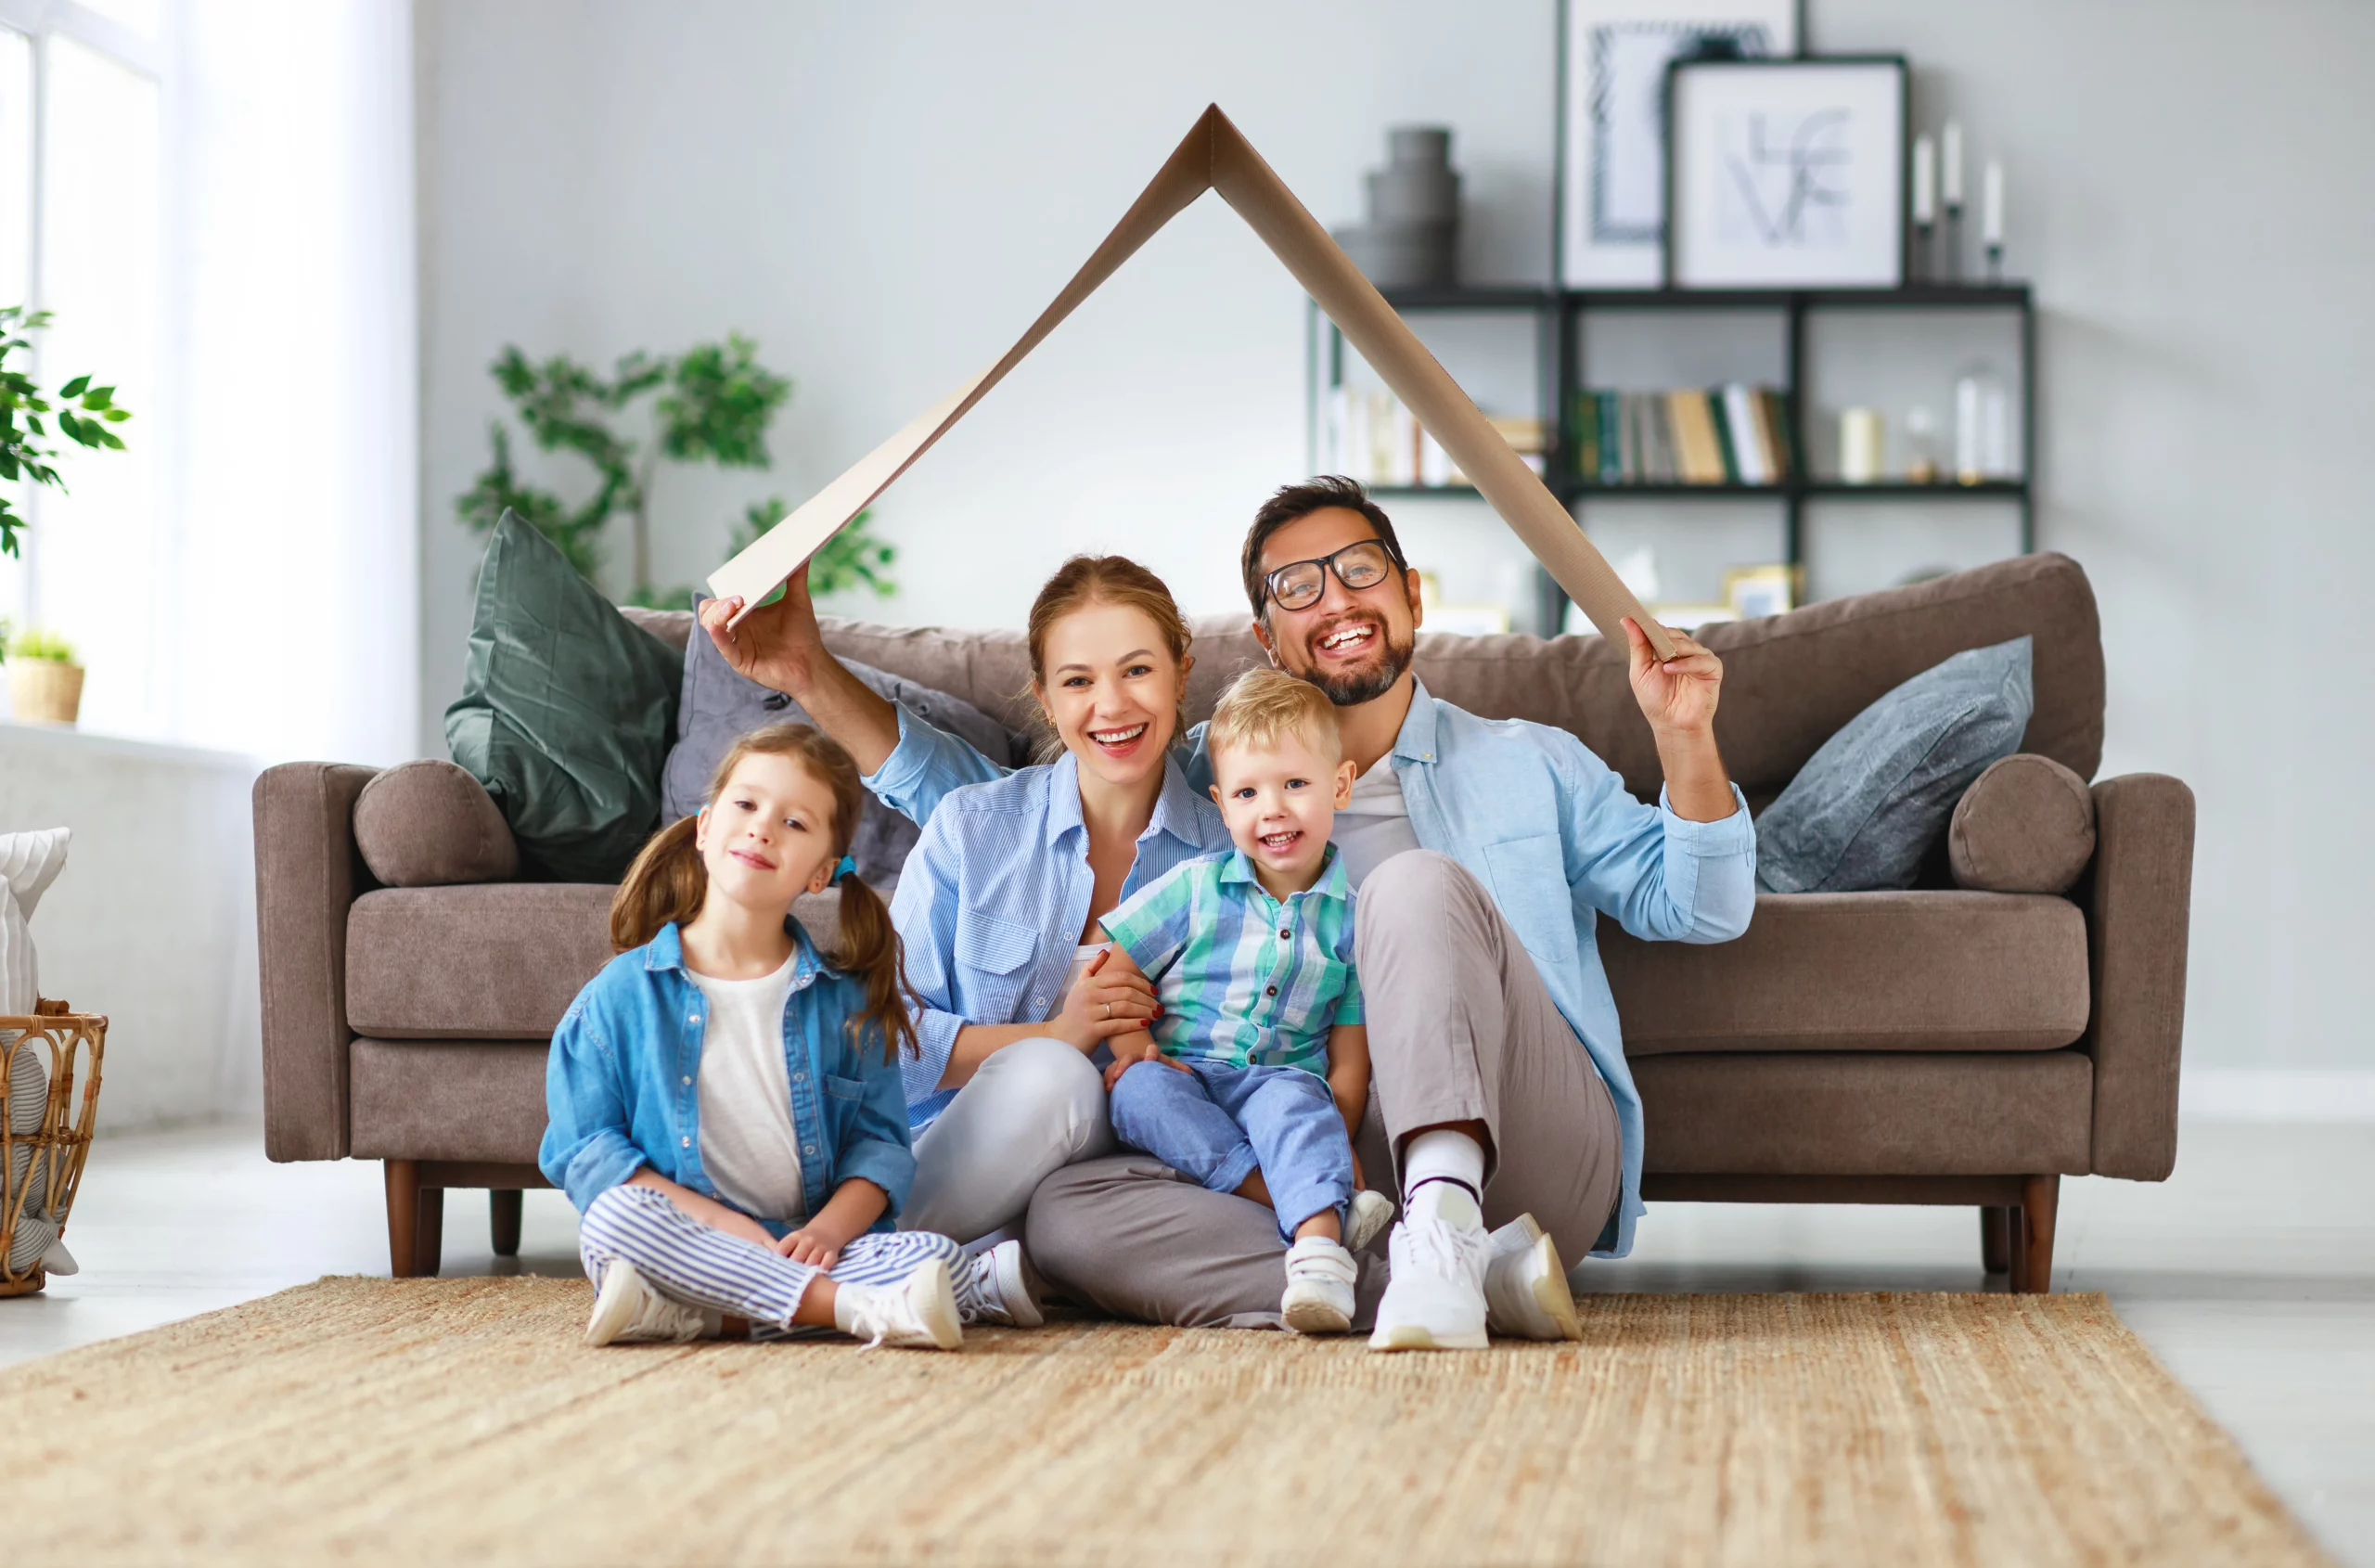 Family enjoying worry free time spent together